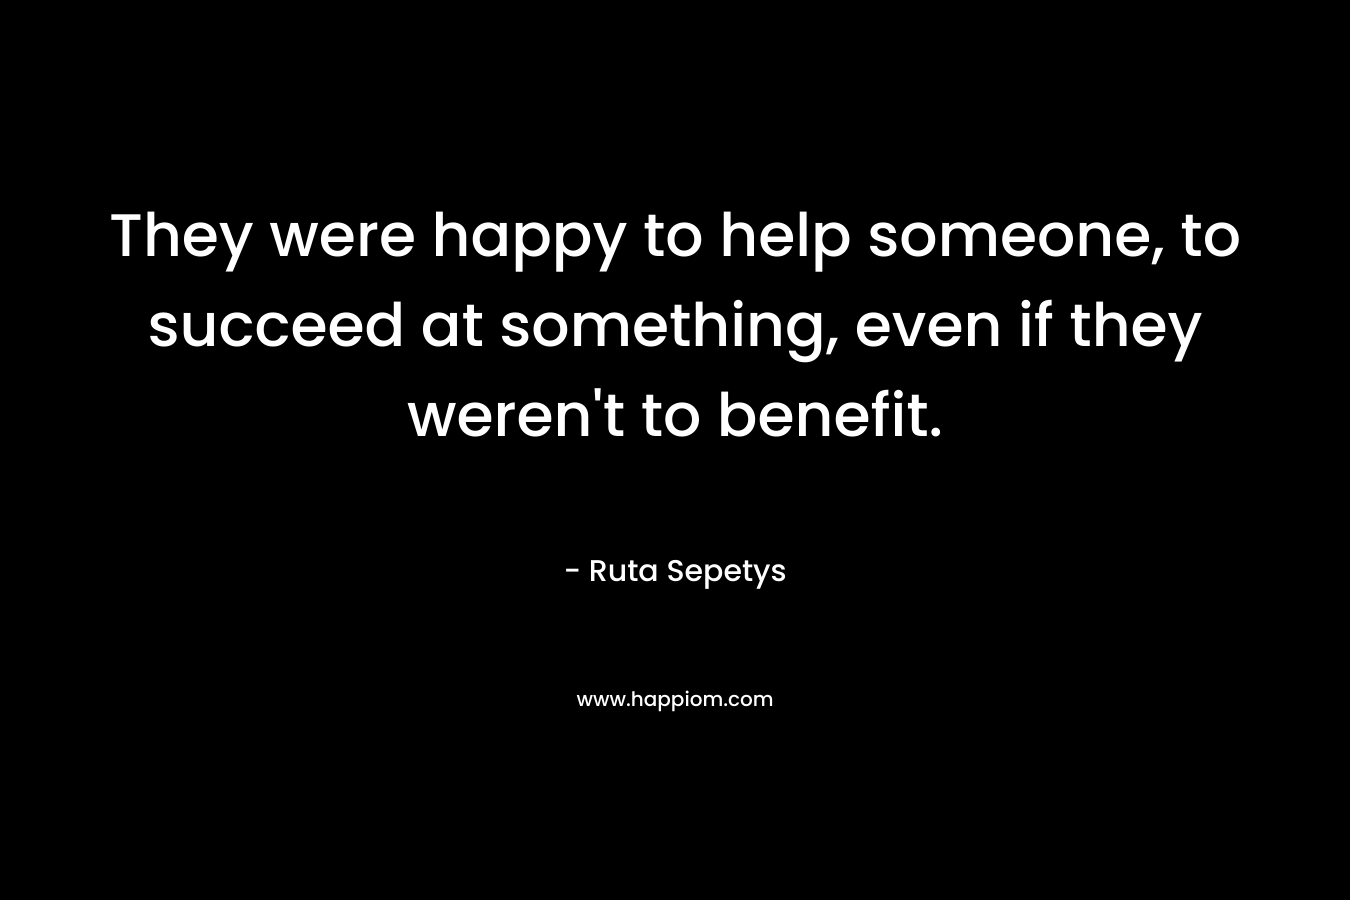 They were happy to help someone, to succeed at something, even if they weren't to benefit.